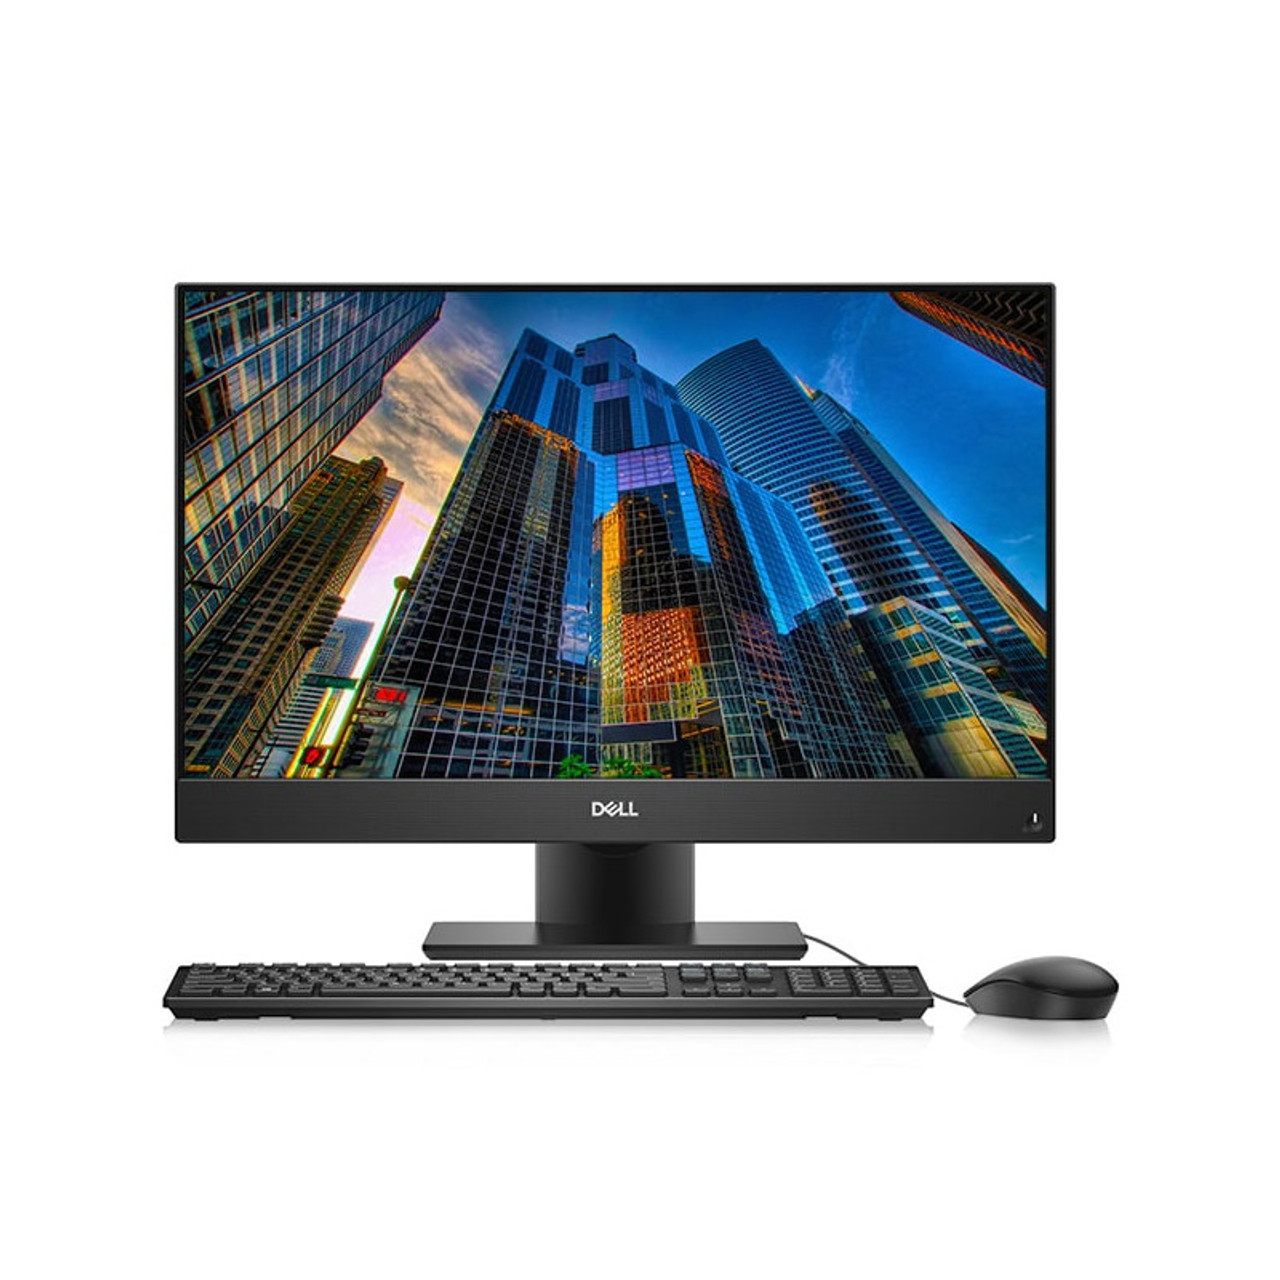 Clearance Dell OptiPlex 24-inch All in One PC Windows 11 i7 16GB 